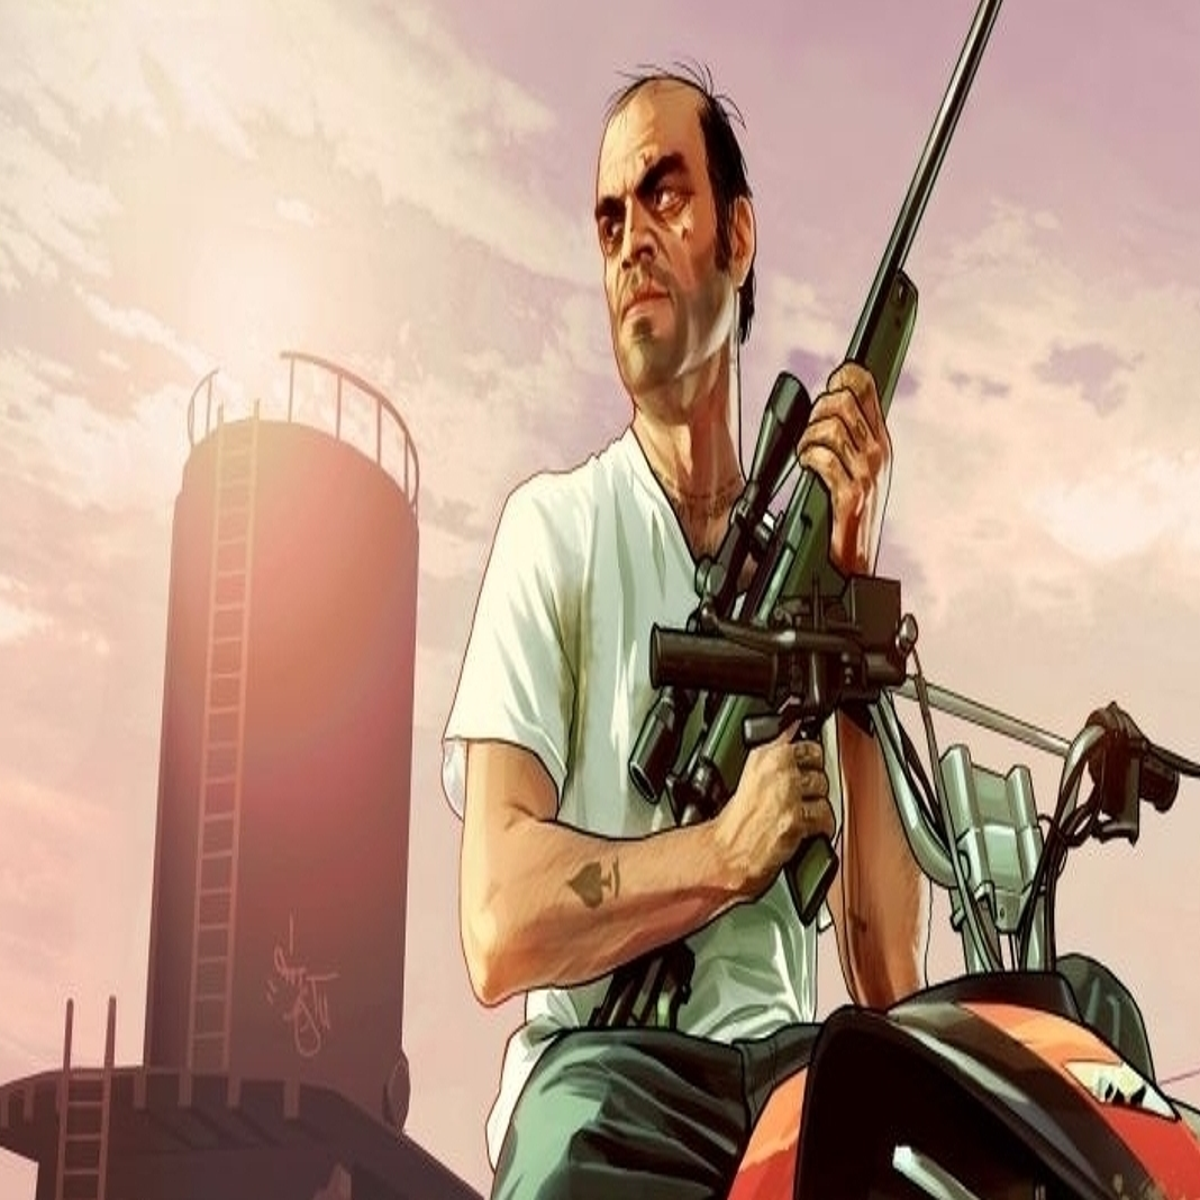 Typical Gamer - GTA 5 Real Life Mod returns today with a brand new